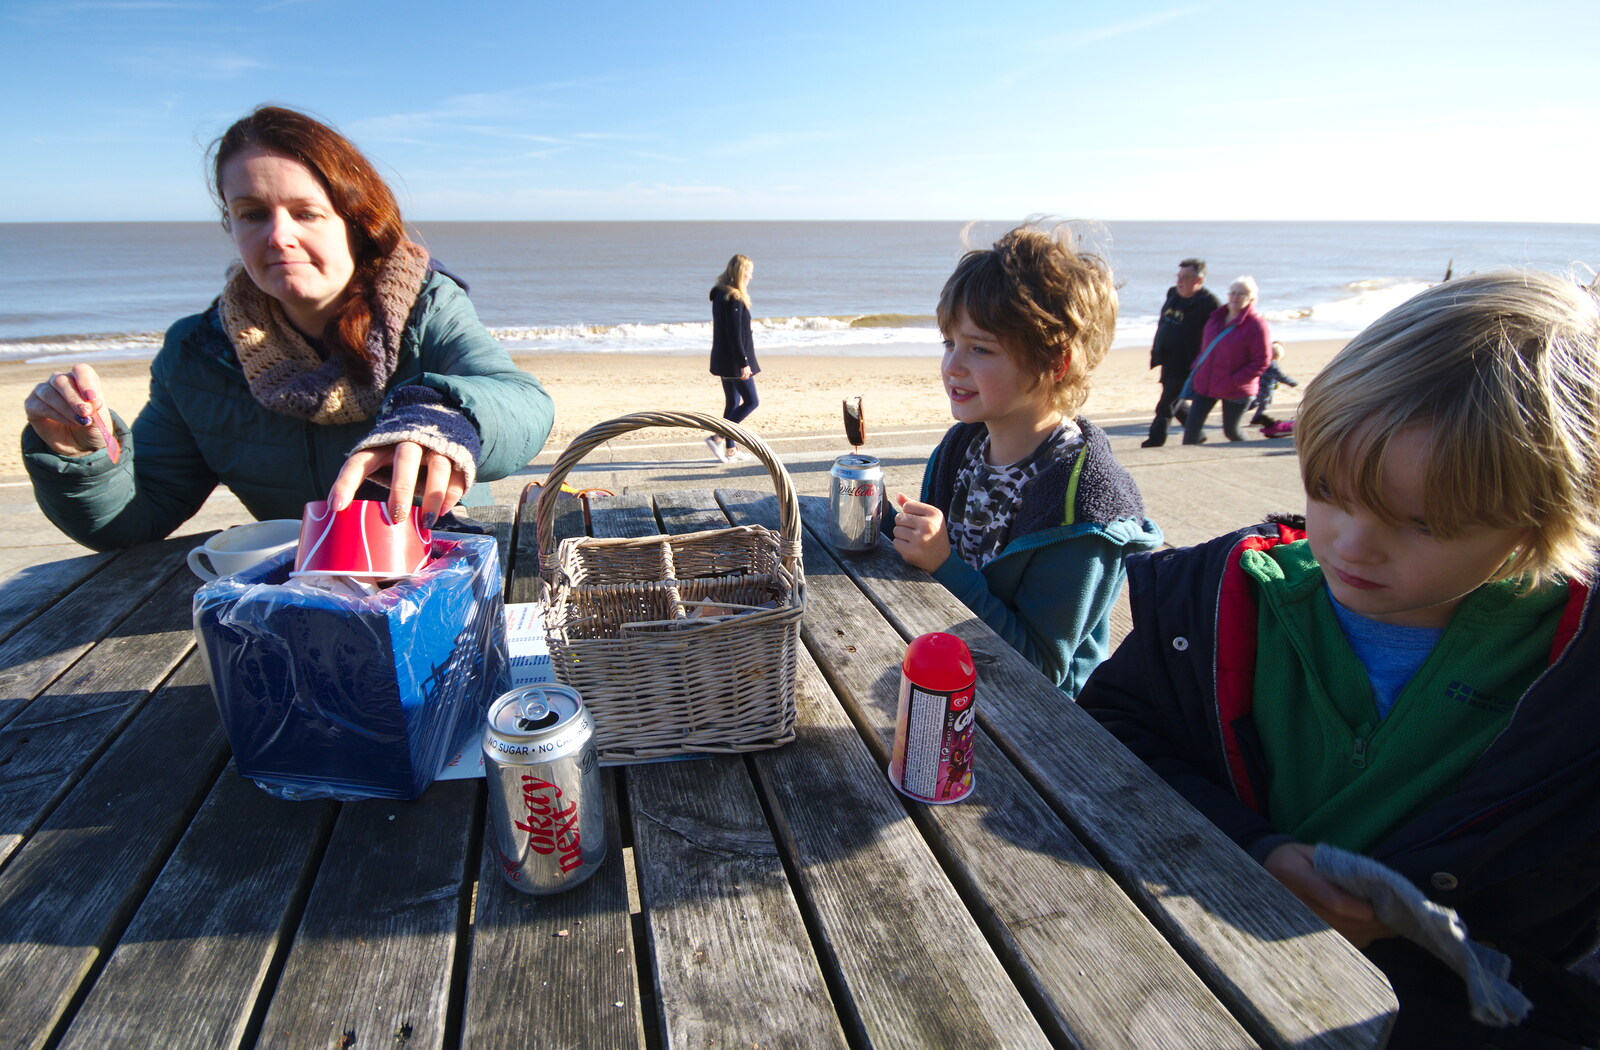 Ice-creams and drinks on the sea front from A Trip up a Lighthouse, Southwold, Suffolk - 27th October 2019